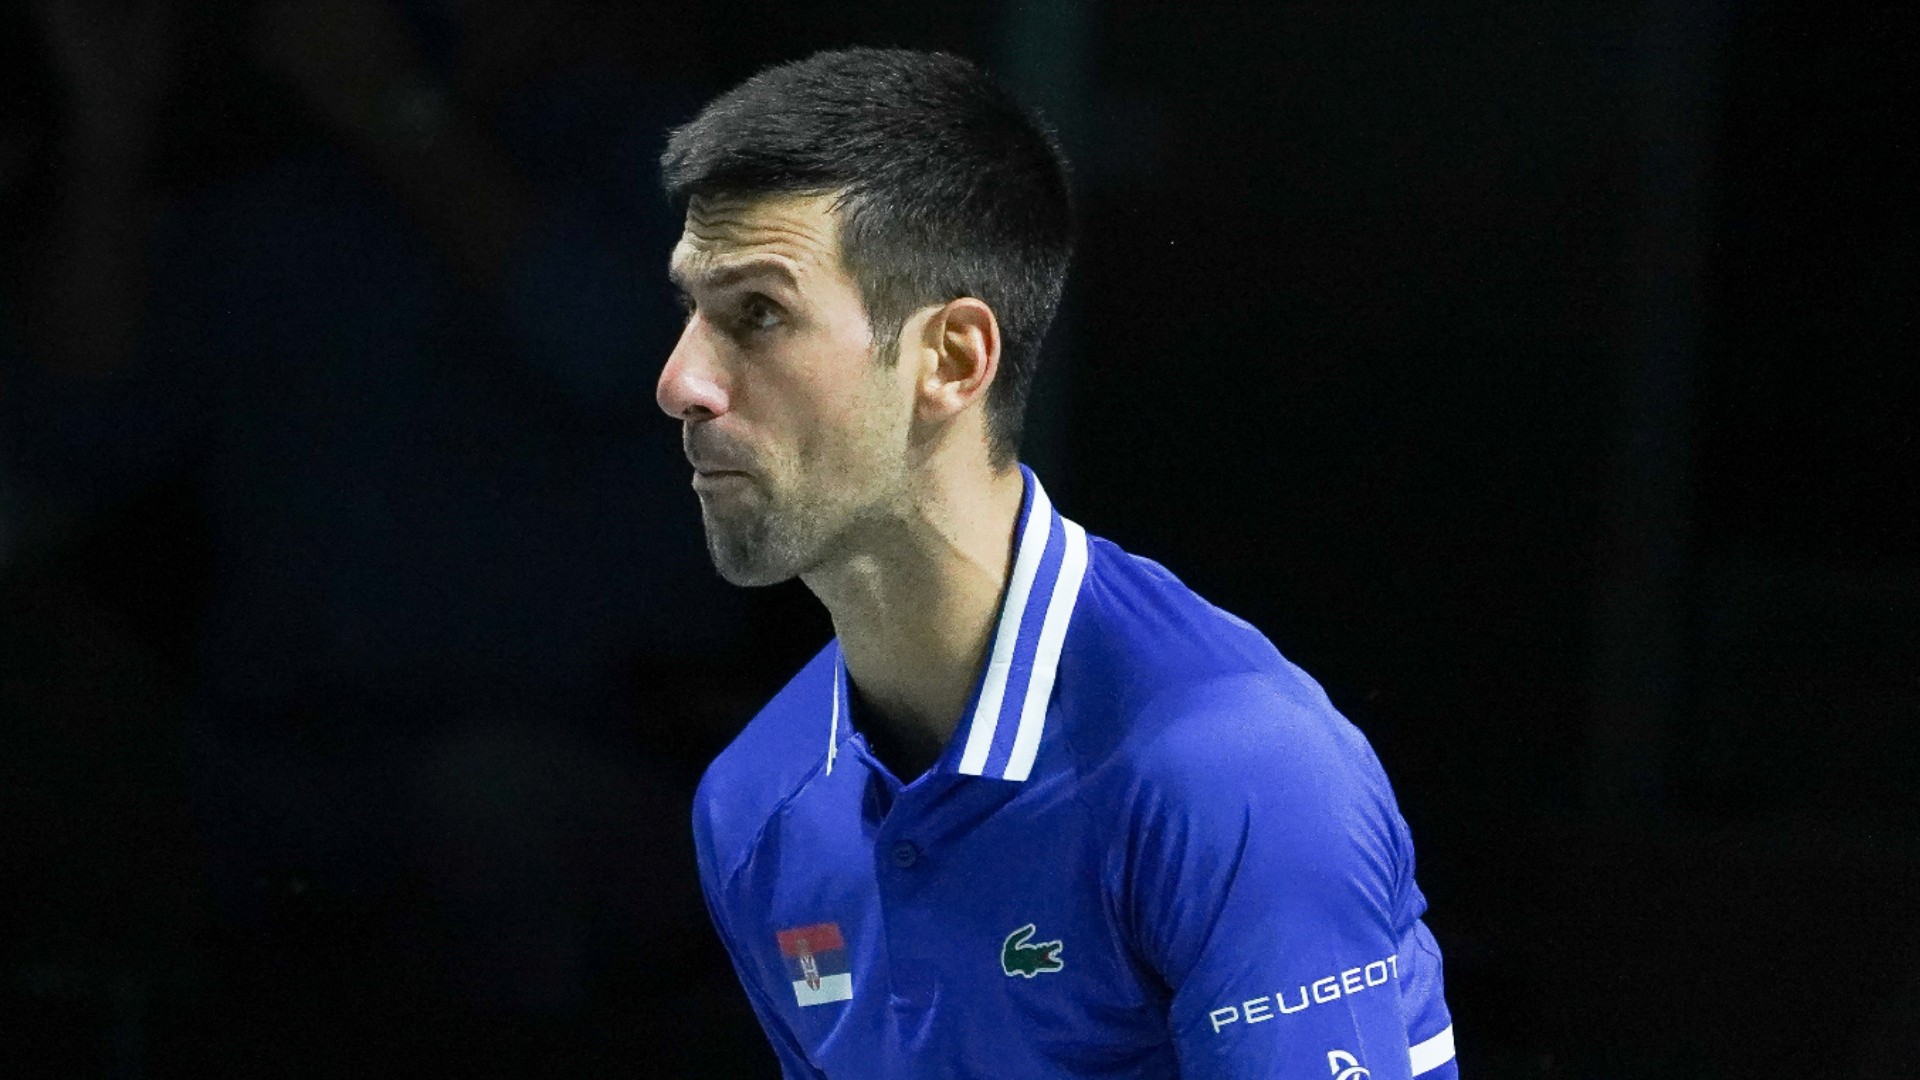 Australian Open: 'Extremely disappointed' Djokovic will not appeal deportation order